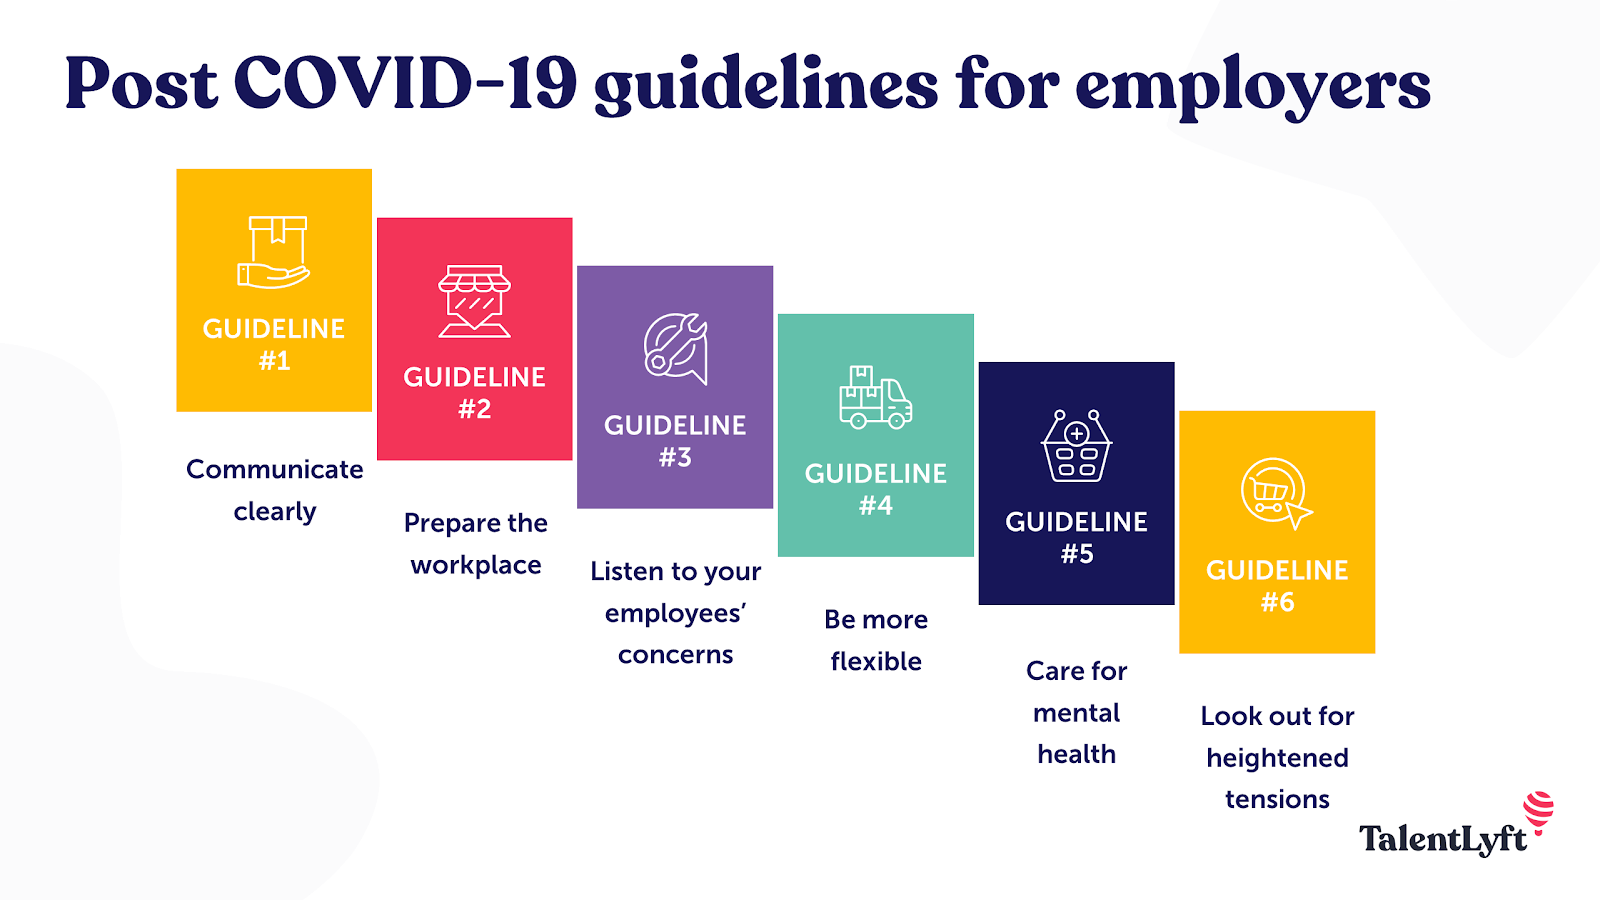 Return to work guidelines for employers